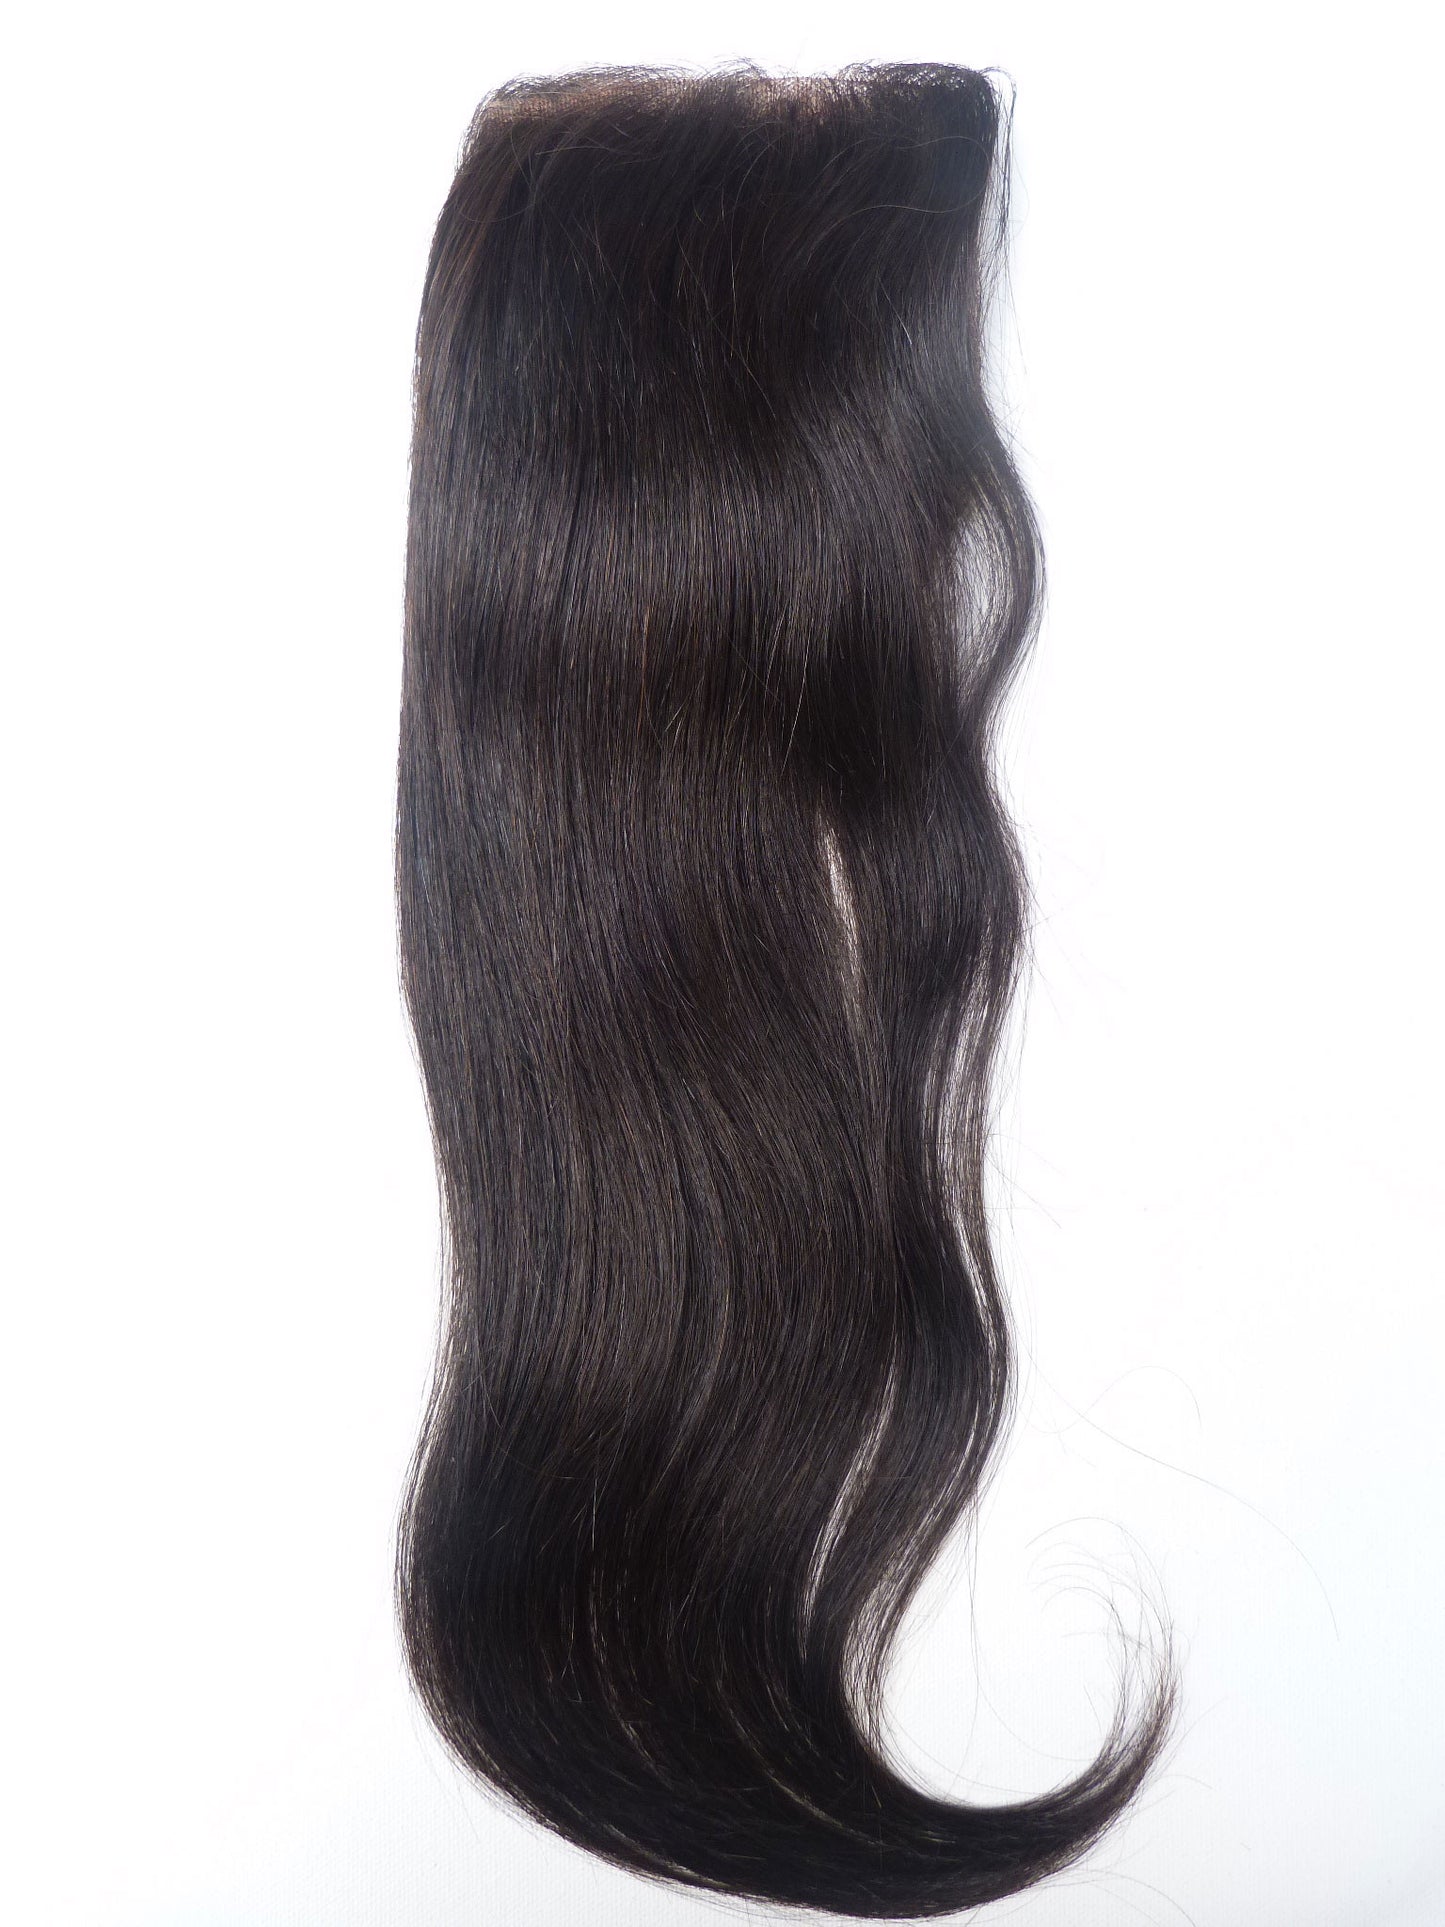 Brazilian Virgin Remy Lace Top Closure, 4"x 4", 12 Inch, Straight, Virgin Uncoloured - Quick Shipping!-Virgin Hair & Beauty, The Best Hair Extensions, Real Virgin Human Hair.